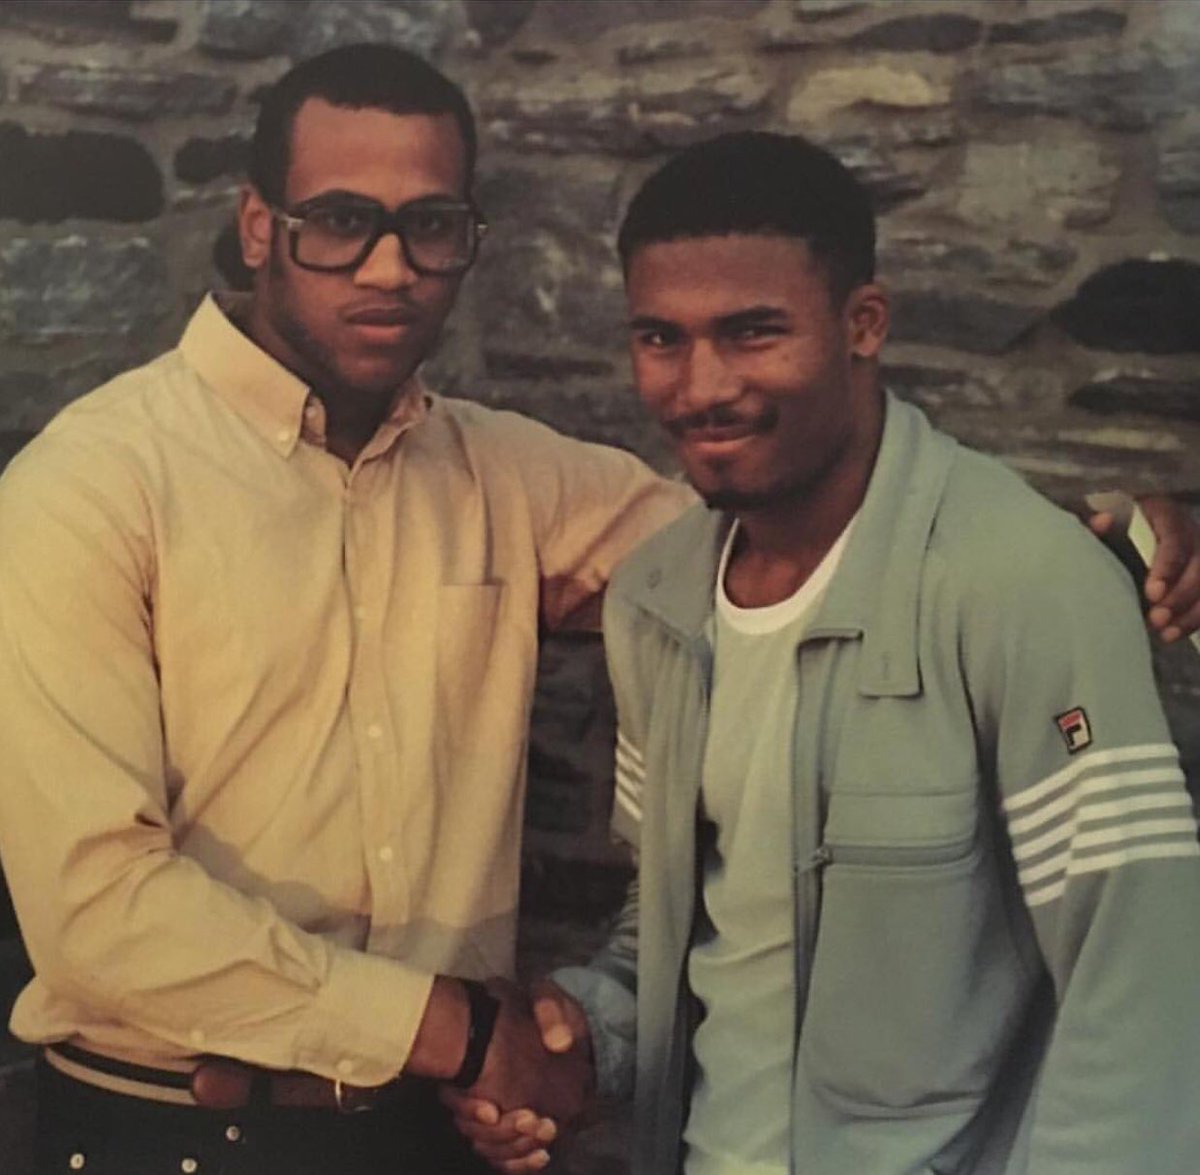 Y’all remember Domencio from my 50 Cent thread? Wayne’s first Murder for Alpo was him at the basketball game. Domencio is pictured below on the right. This was taken in Bedstuy.